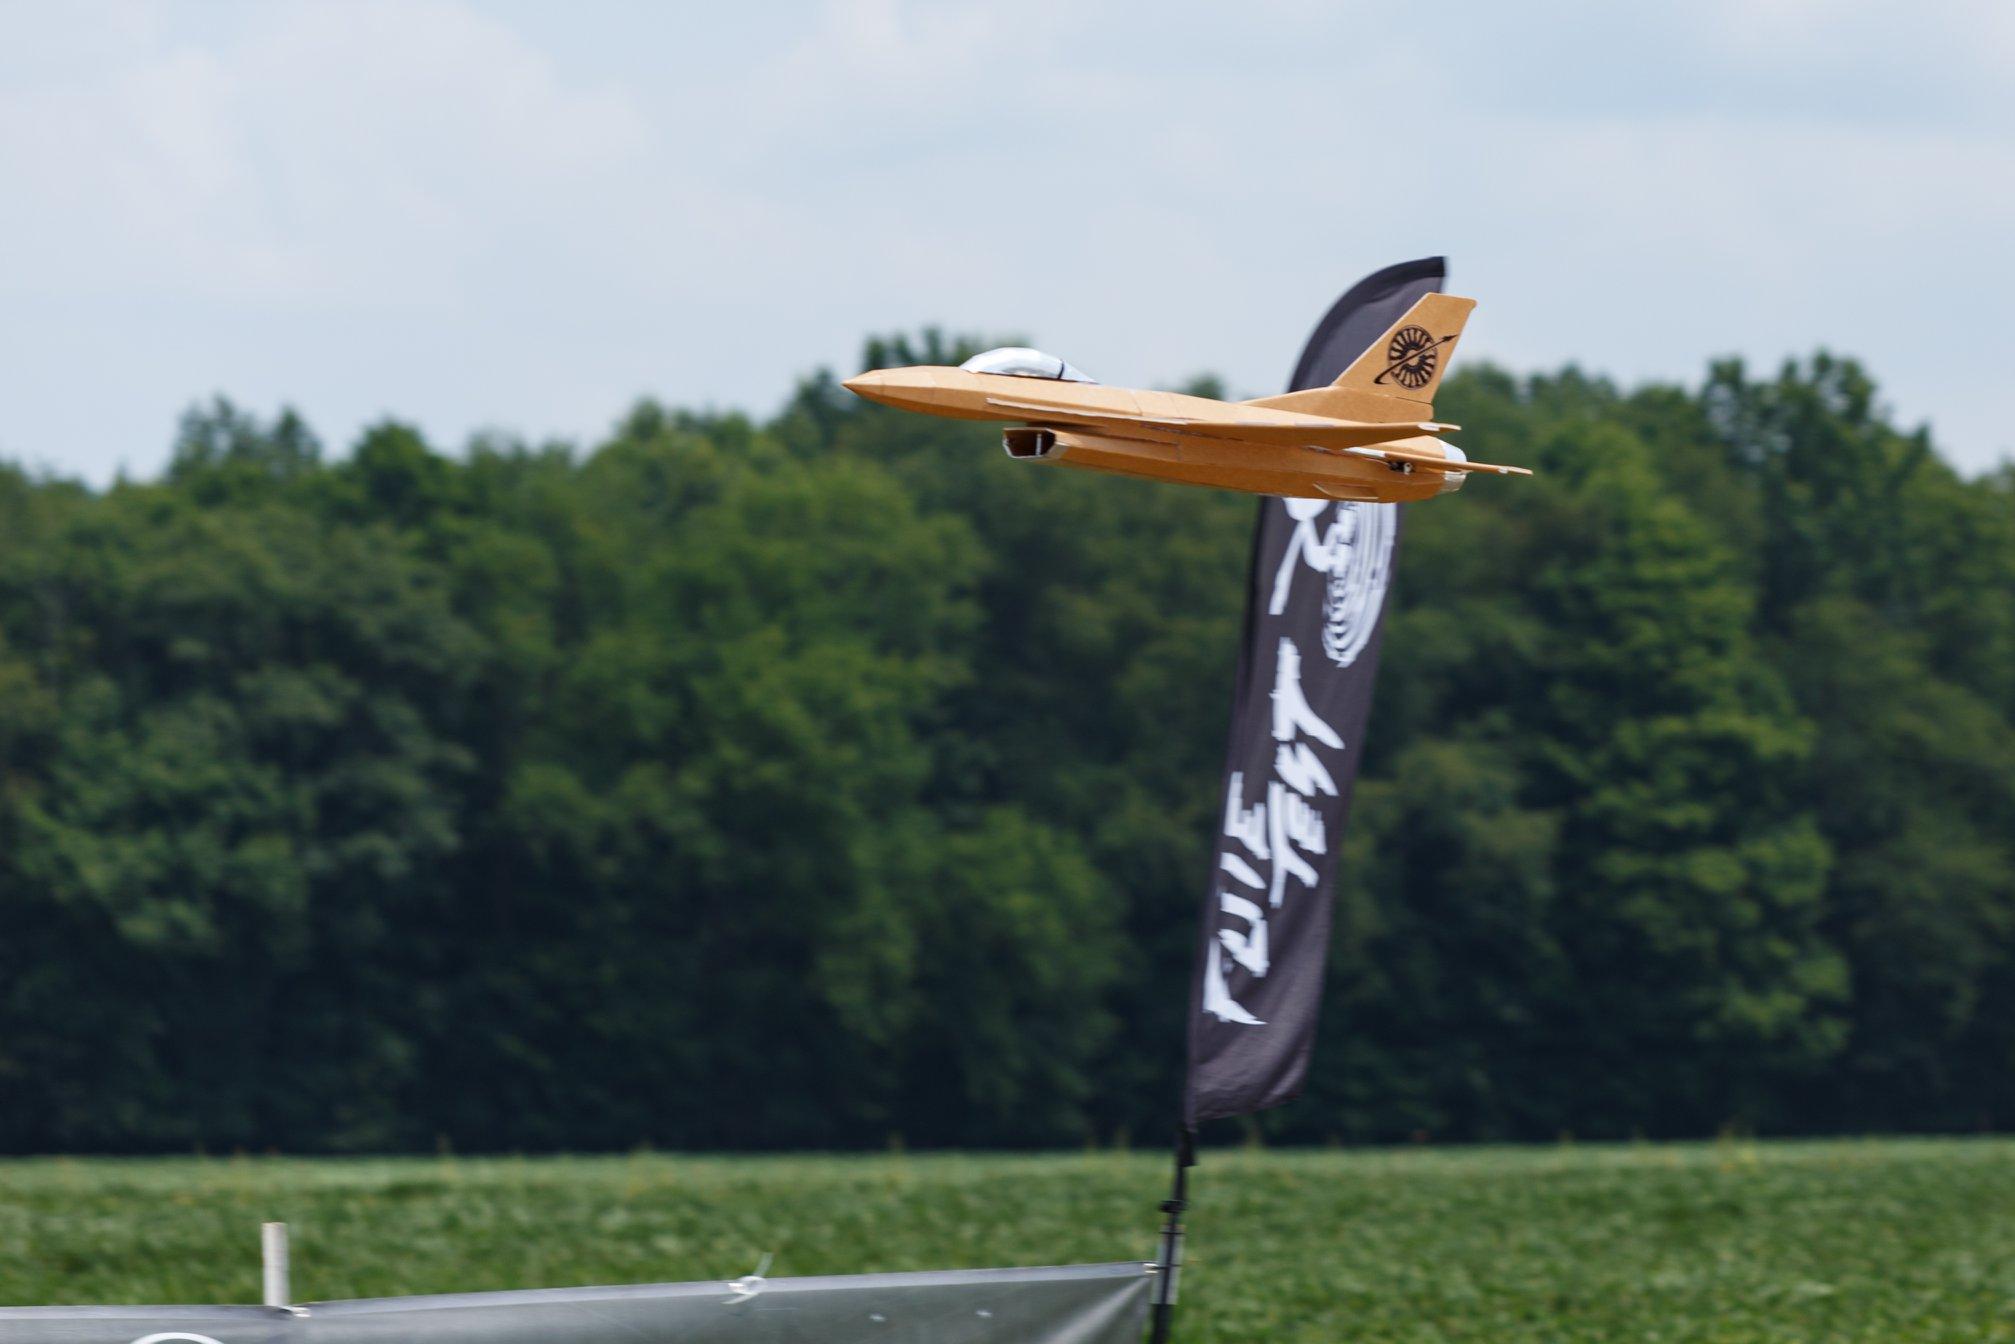 Advanced Rc Planes: Maximizing the Experience: Tips and Accessories for Flying Advanced RC Planes